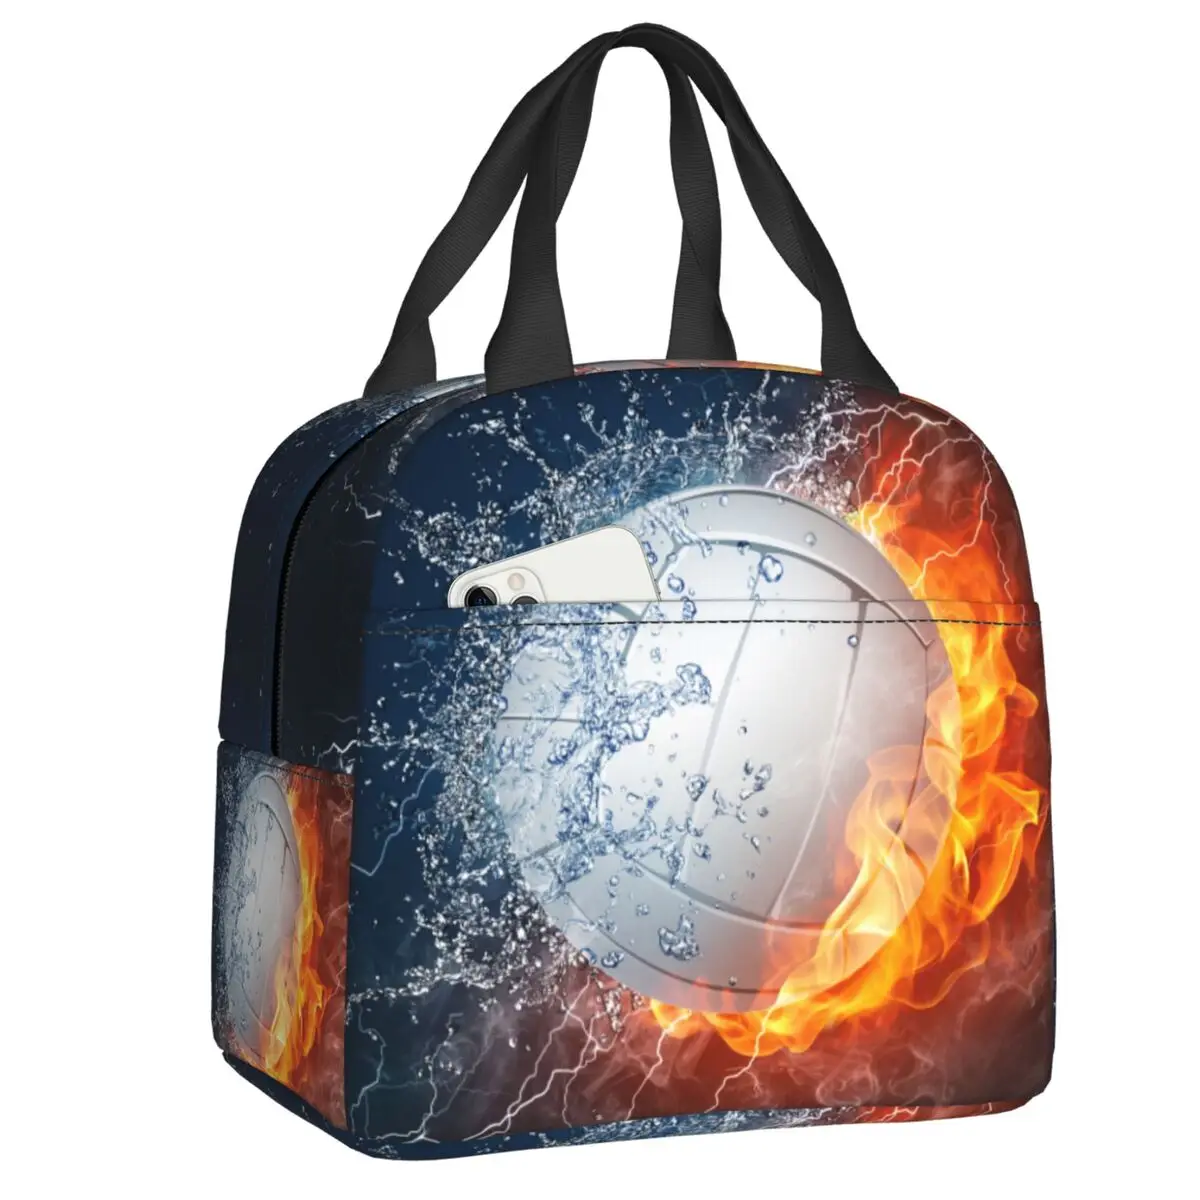 

Football Basketball Volleyball Pattern Insulated Lunch Bag Waterproof Thermal Cooler Bento Box Women Food Container Tote Bags